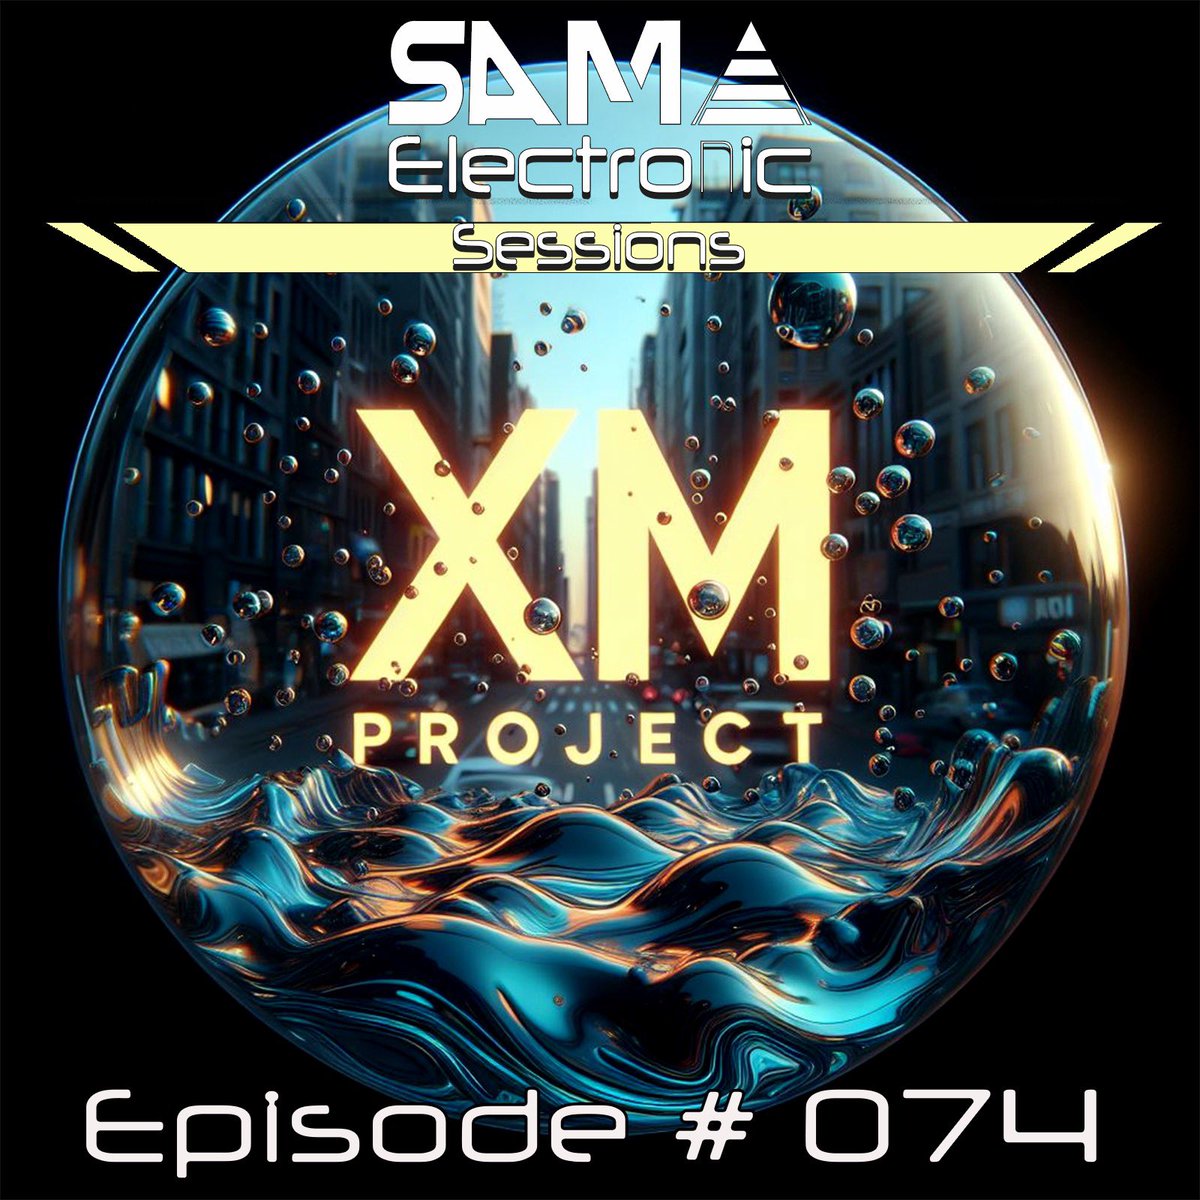 Today at 3PM @sanderferrar & @MarioFlorek presents SAMA Electronic Sessions EP 074 at AH.FM ! Join us for deeper & melodic journey special XM PROJECT set 😉 #melodichouse #MelodicTechno #progressivehouse #progressivehouse #deeptrance #deephouse #SAMA #XMProject